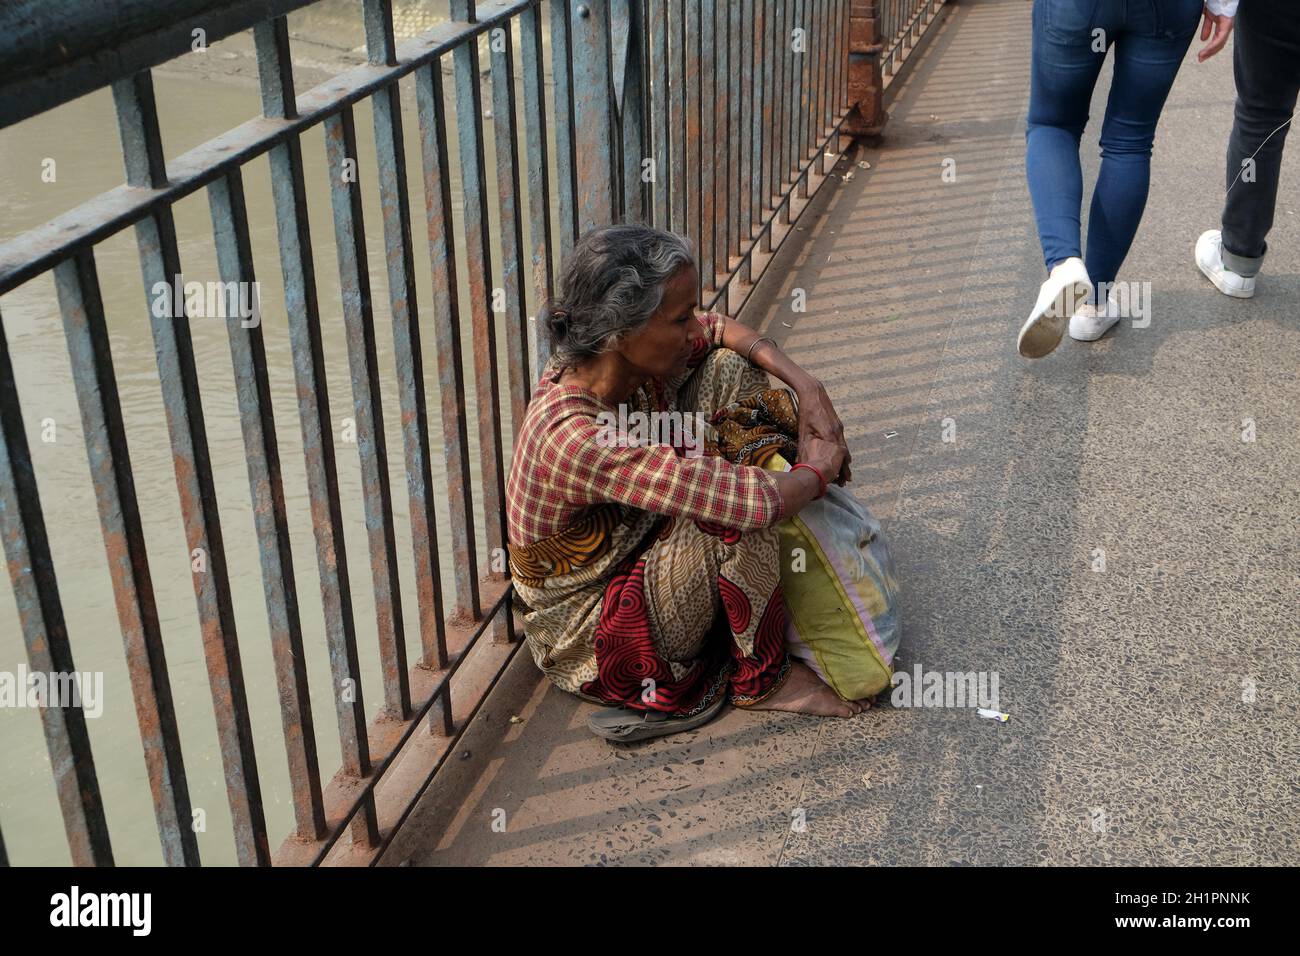 Beggars are the most disadvantaged castes living in the streets, Kolkata, India Stock Photo